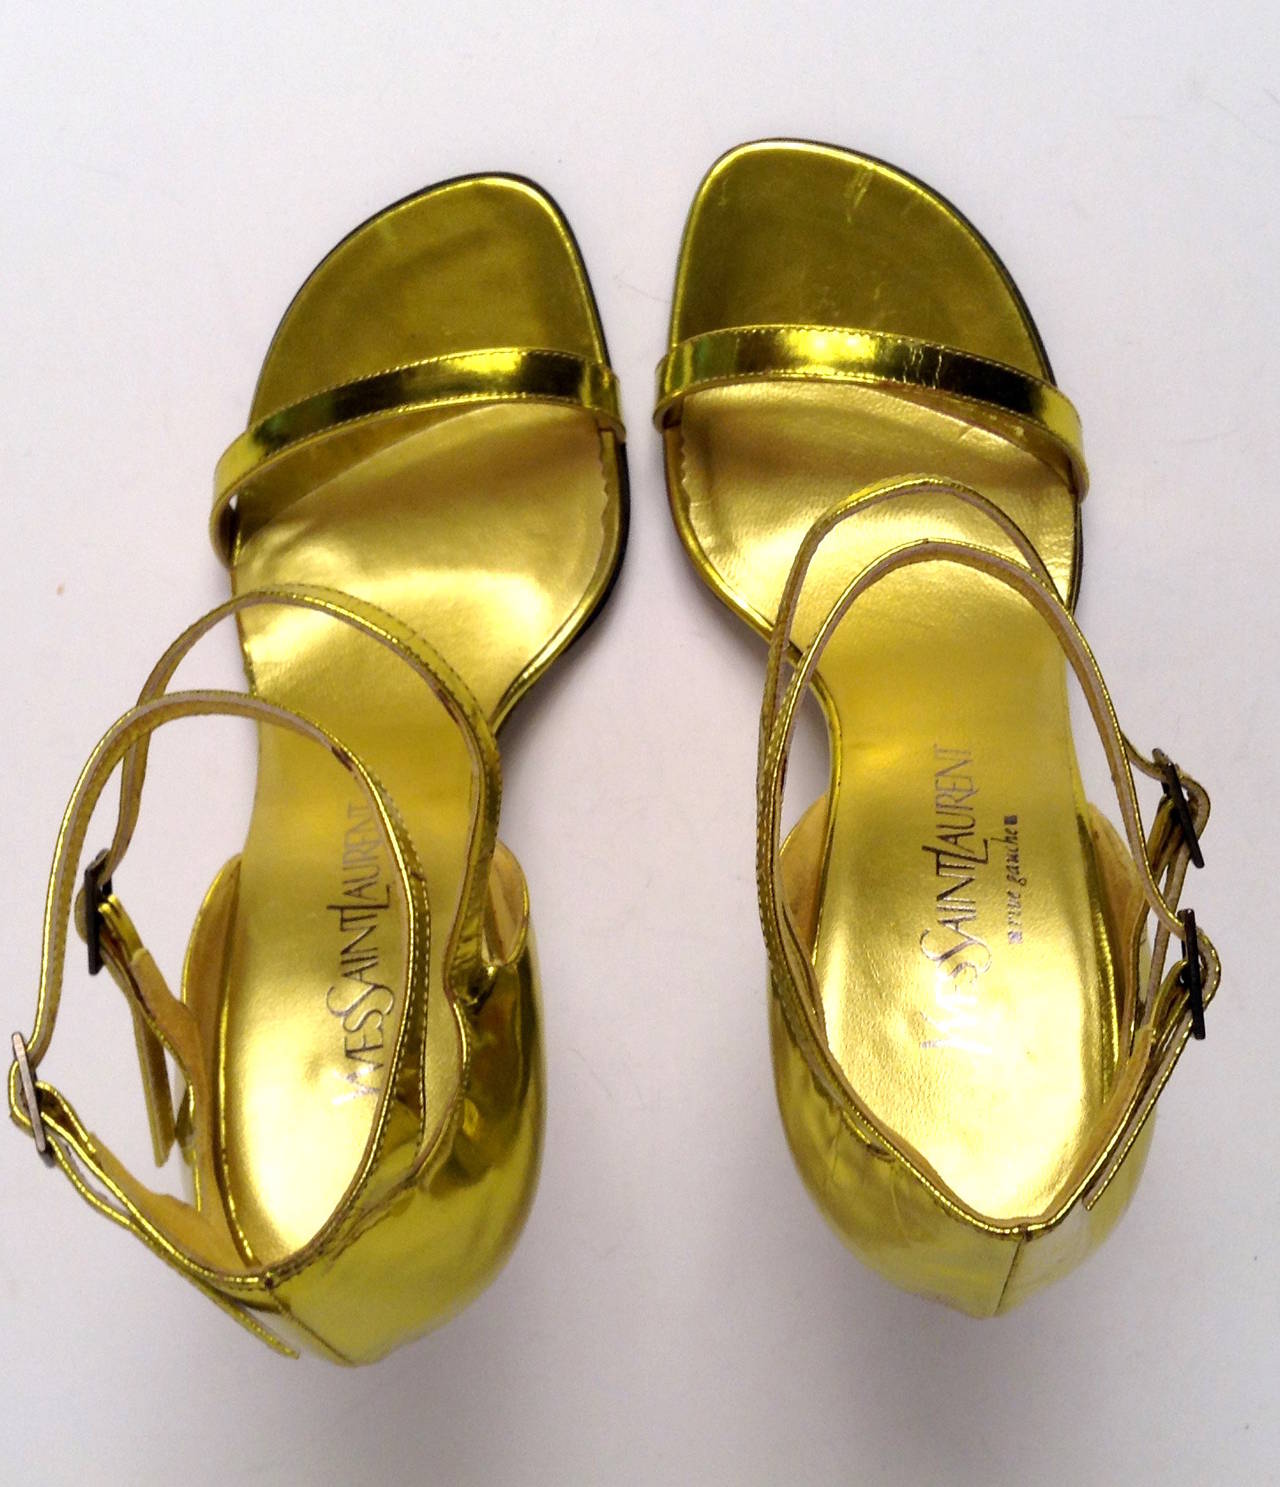 Yves Saint Laurent (Tom Ford) Iconic Gold wedges Size 38.5 For Sale 2